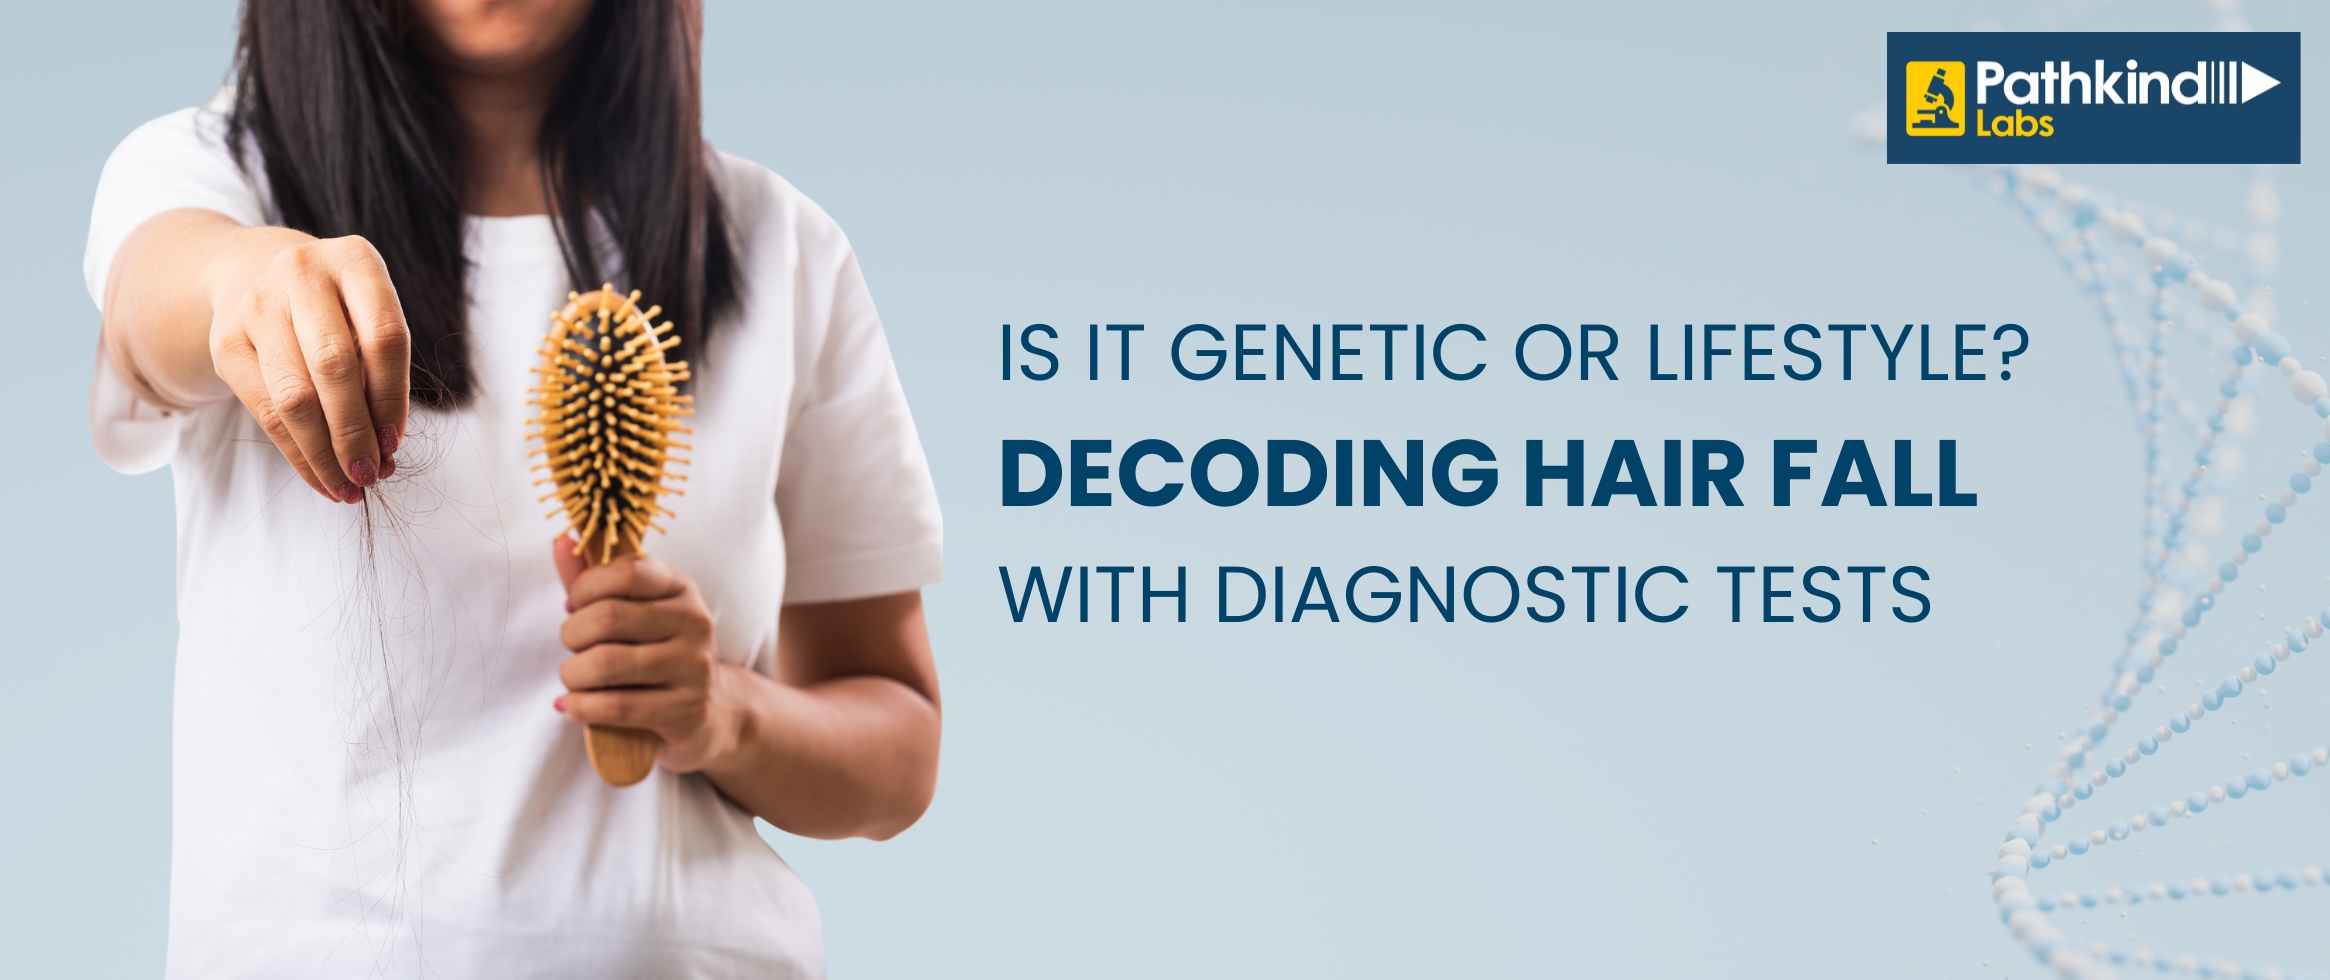 Is It Genetic or Lifestyle? Decoding Hair Fall with Diagnostic Tests